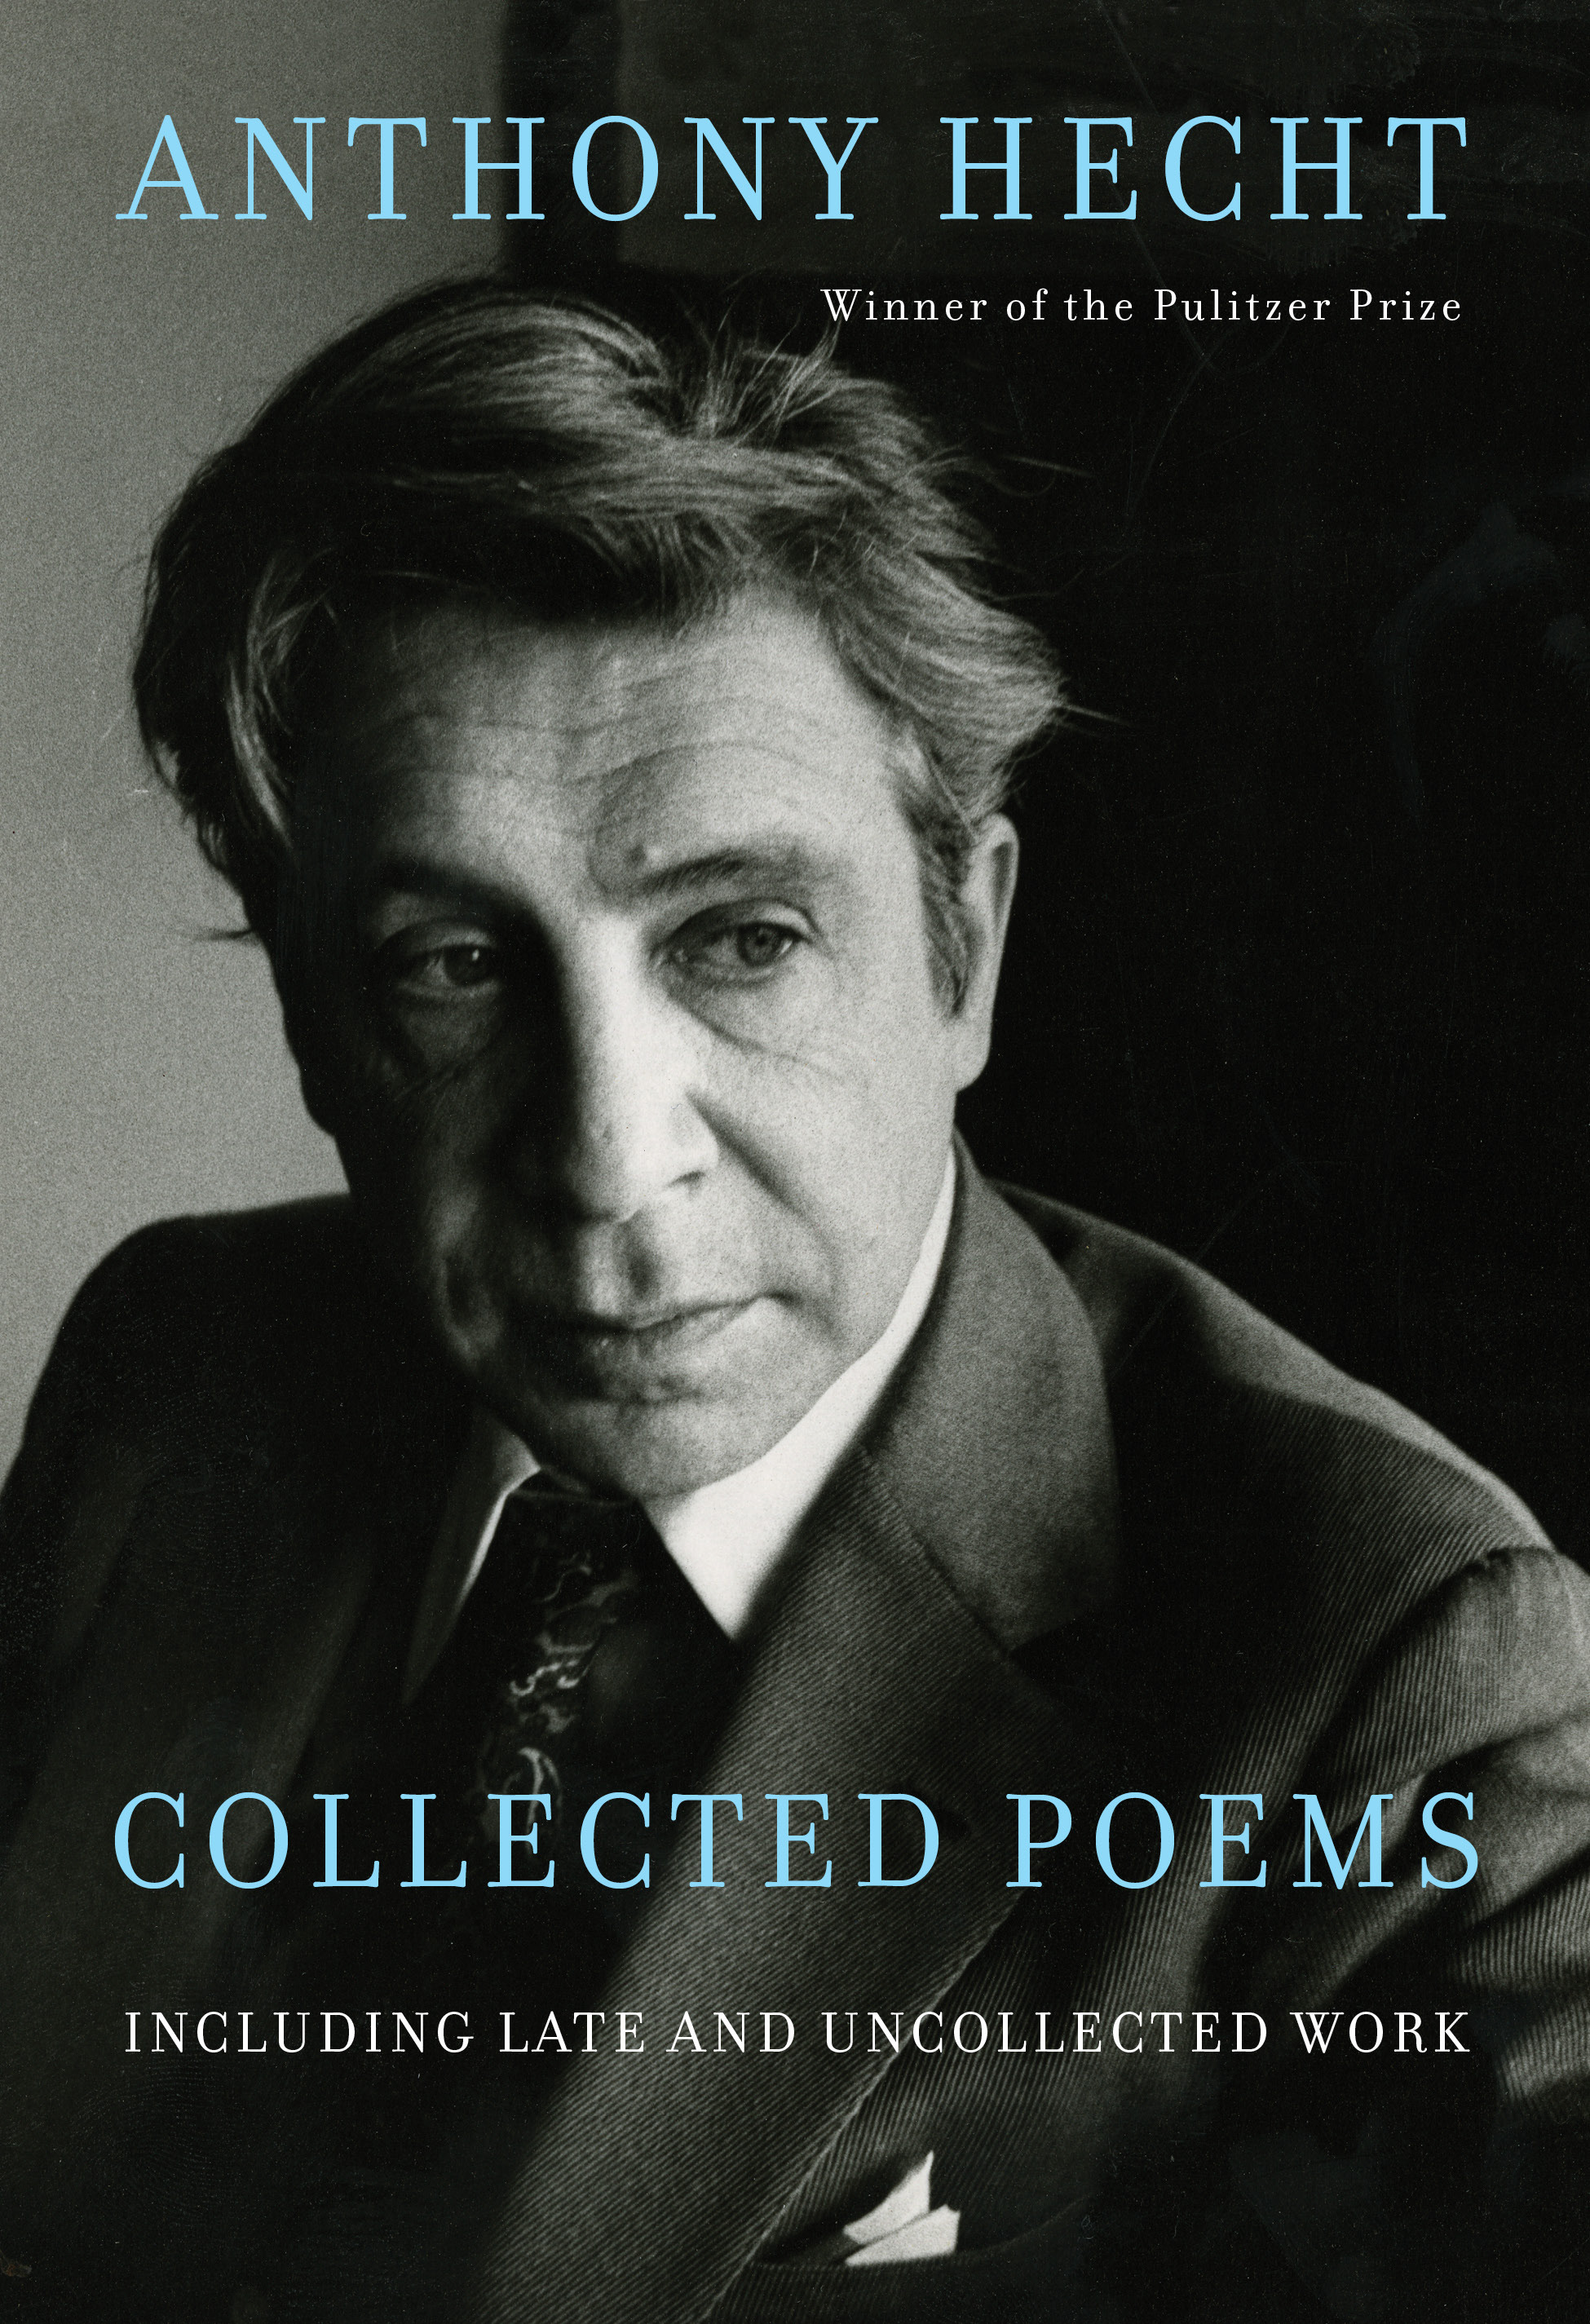 Collected Poems of Anthony Hecht : Including late and uncollected work | Hecht, Anthony (Auteur)